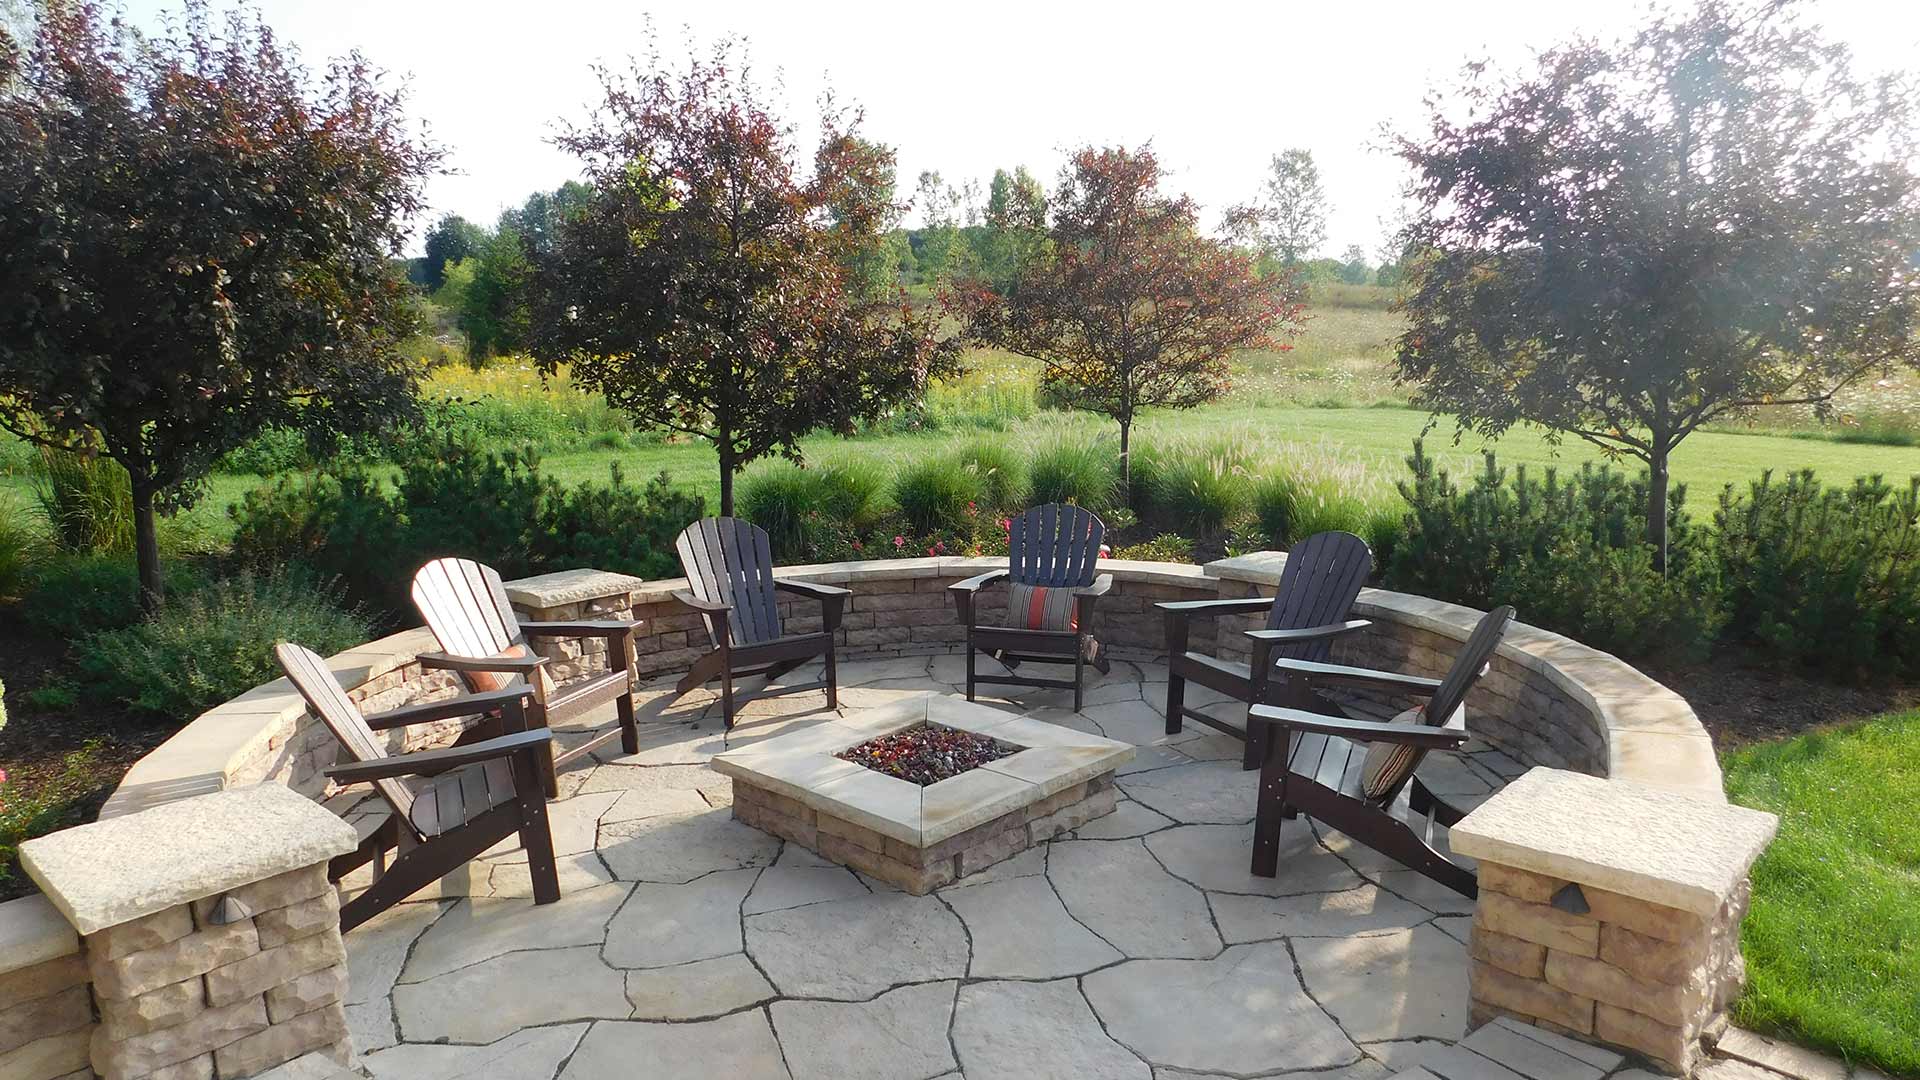 Custom fire pit installed in paved patio in Muskegon, MI.